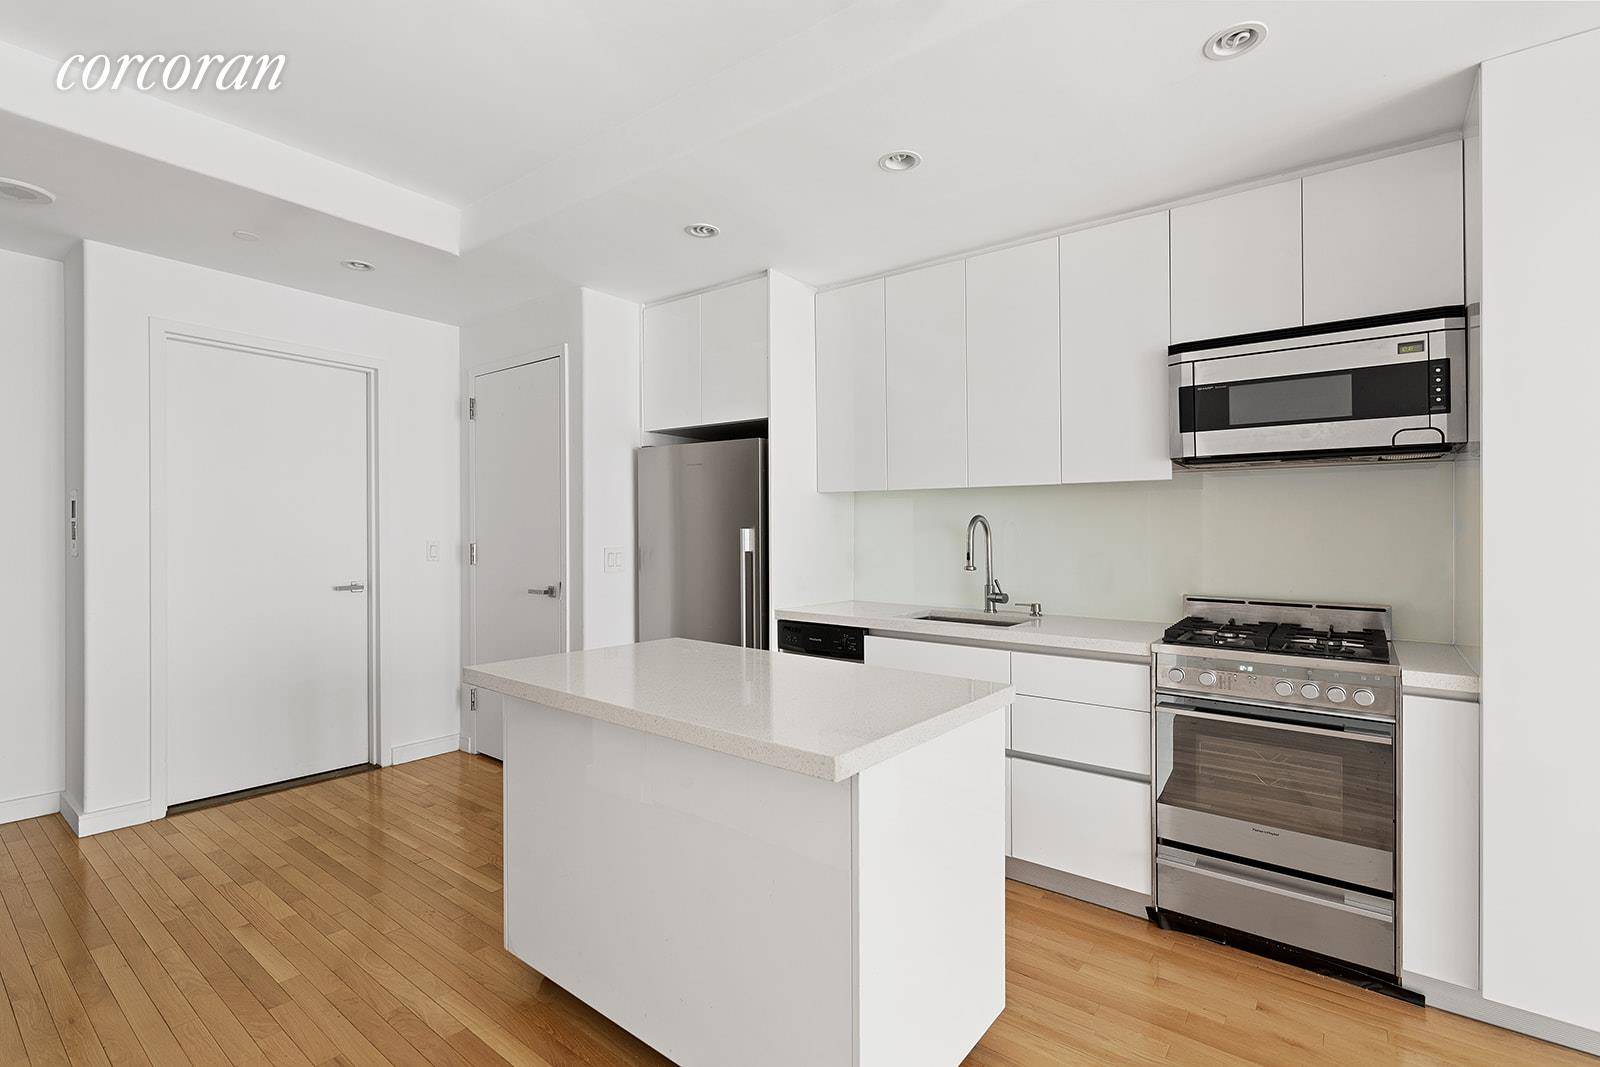 We are ready to Sell. This stylish studio features floor to ceiling double insulated windows, private balcony with cordless custom white oak hardwood floors, central A C.